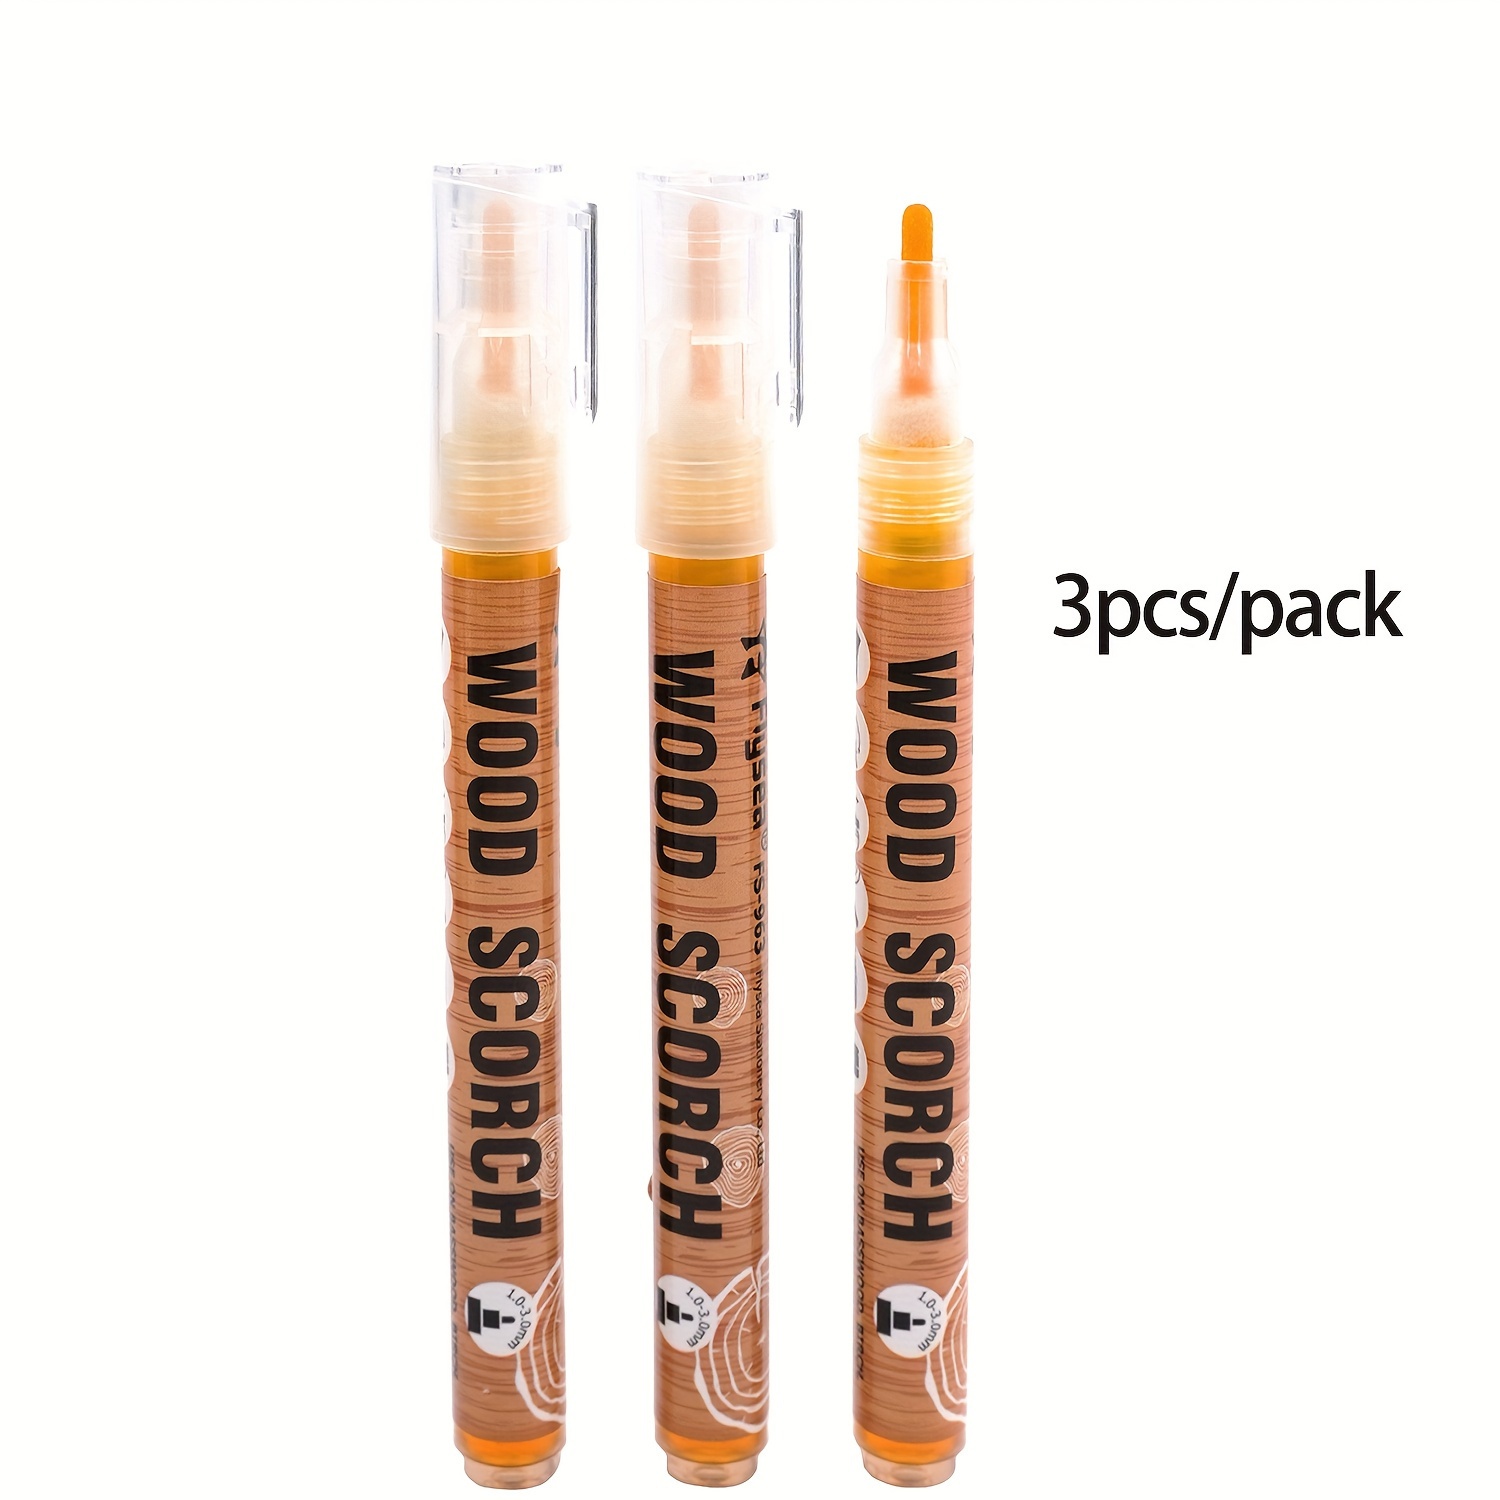 3 Pack of Scorch Markers